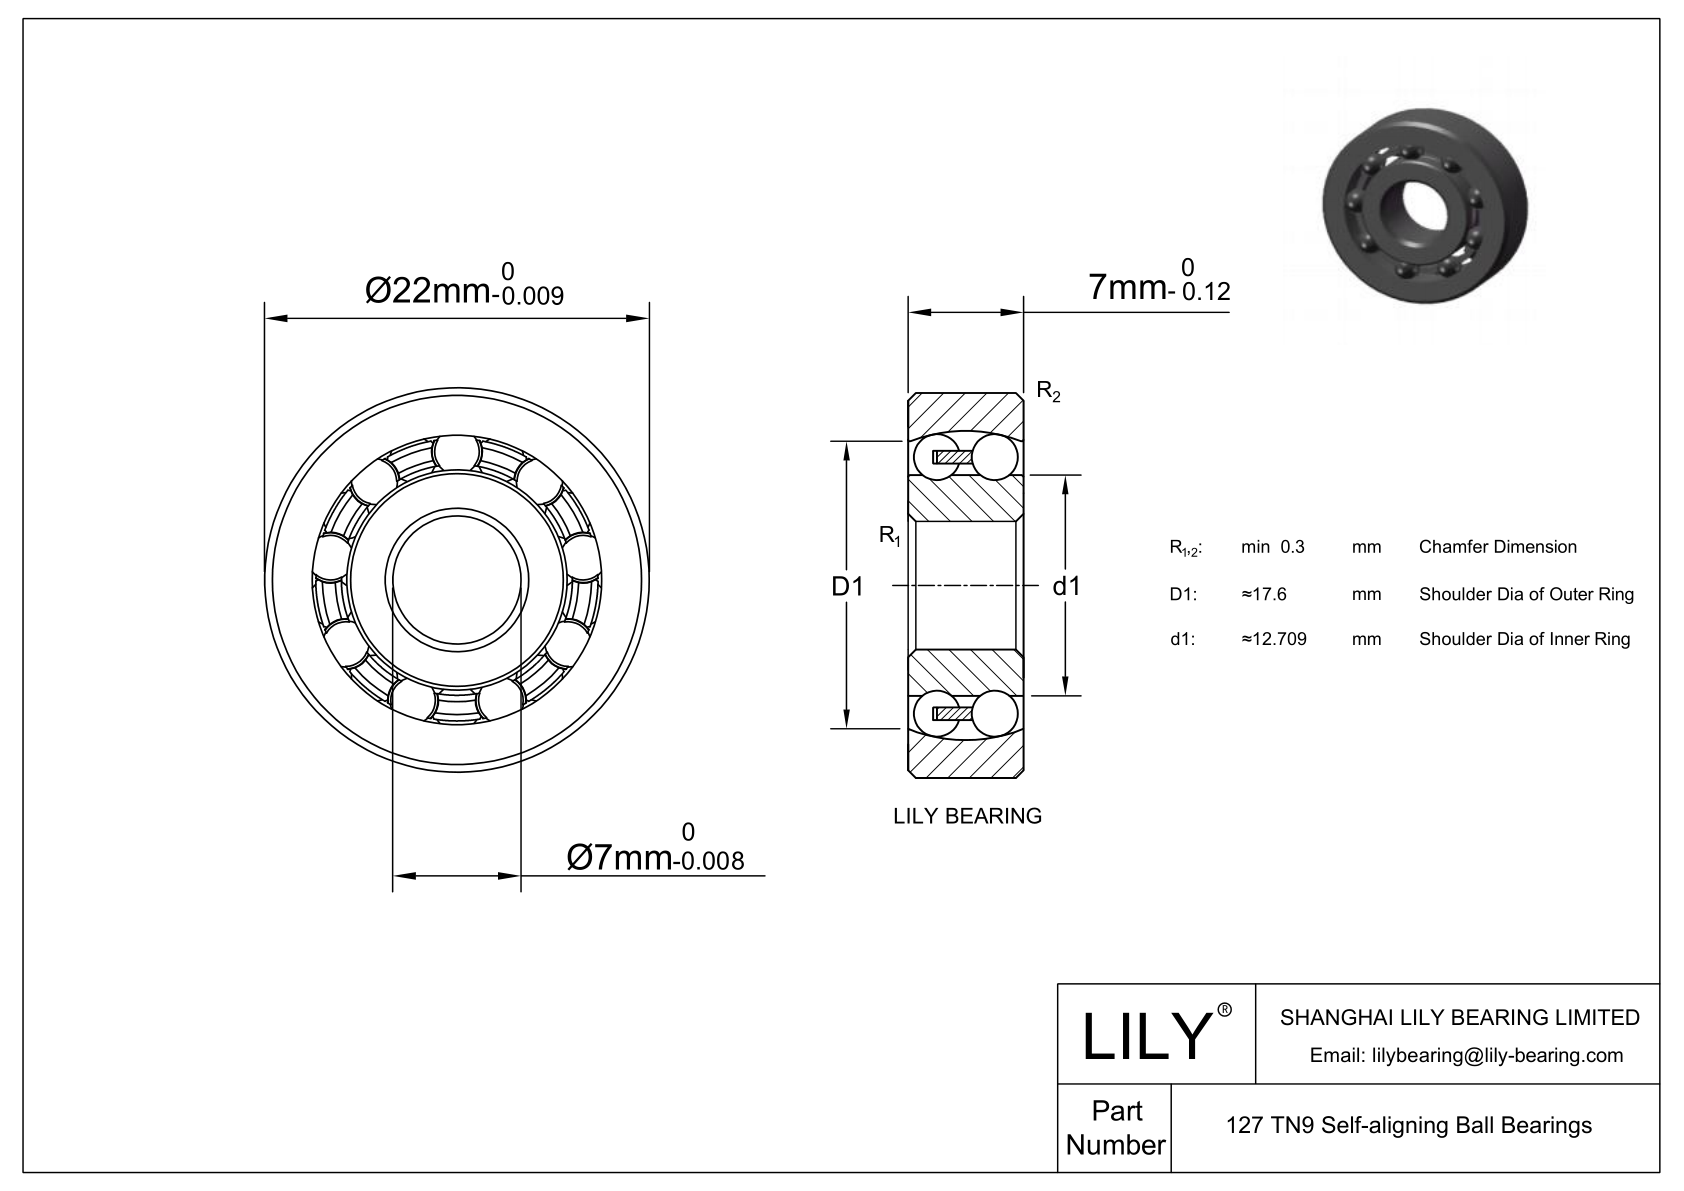 CE127SI Silicon Nitride Self Aligning Ball Bearings cad drawing